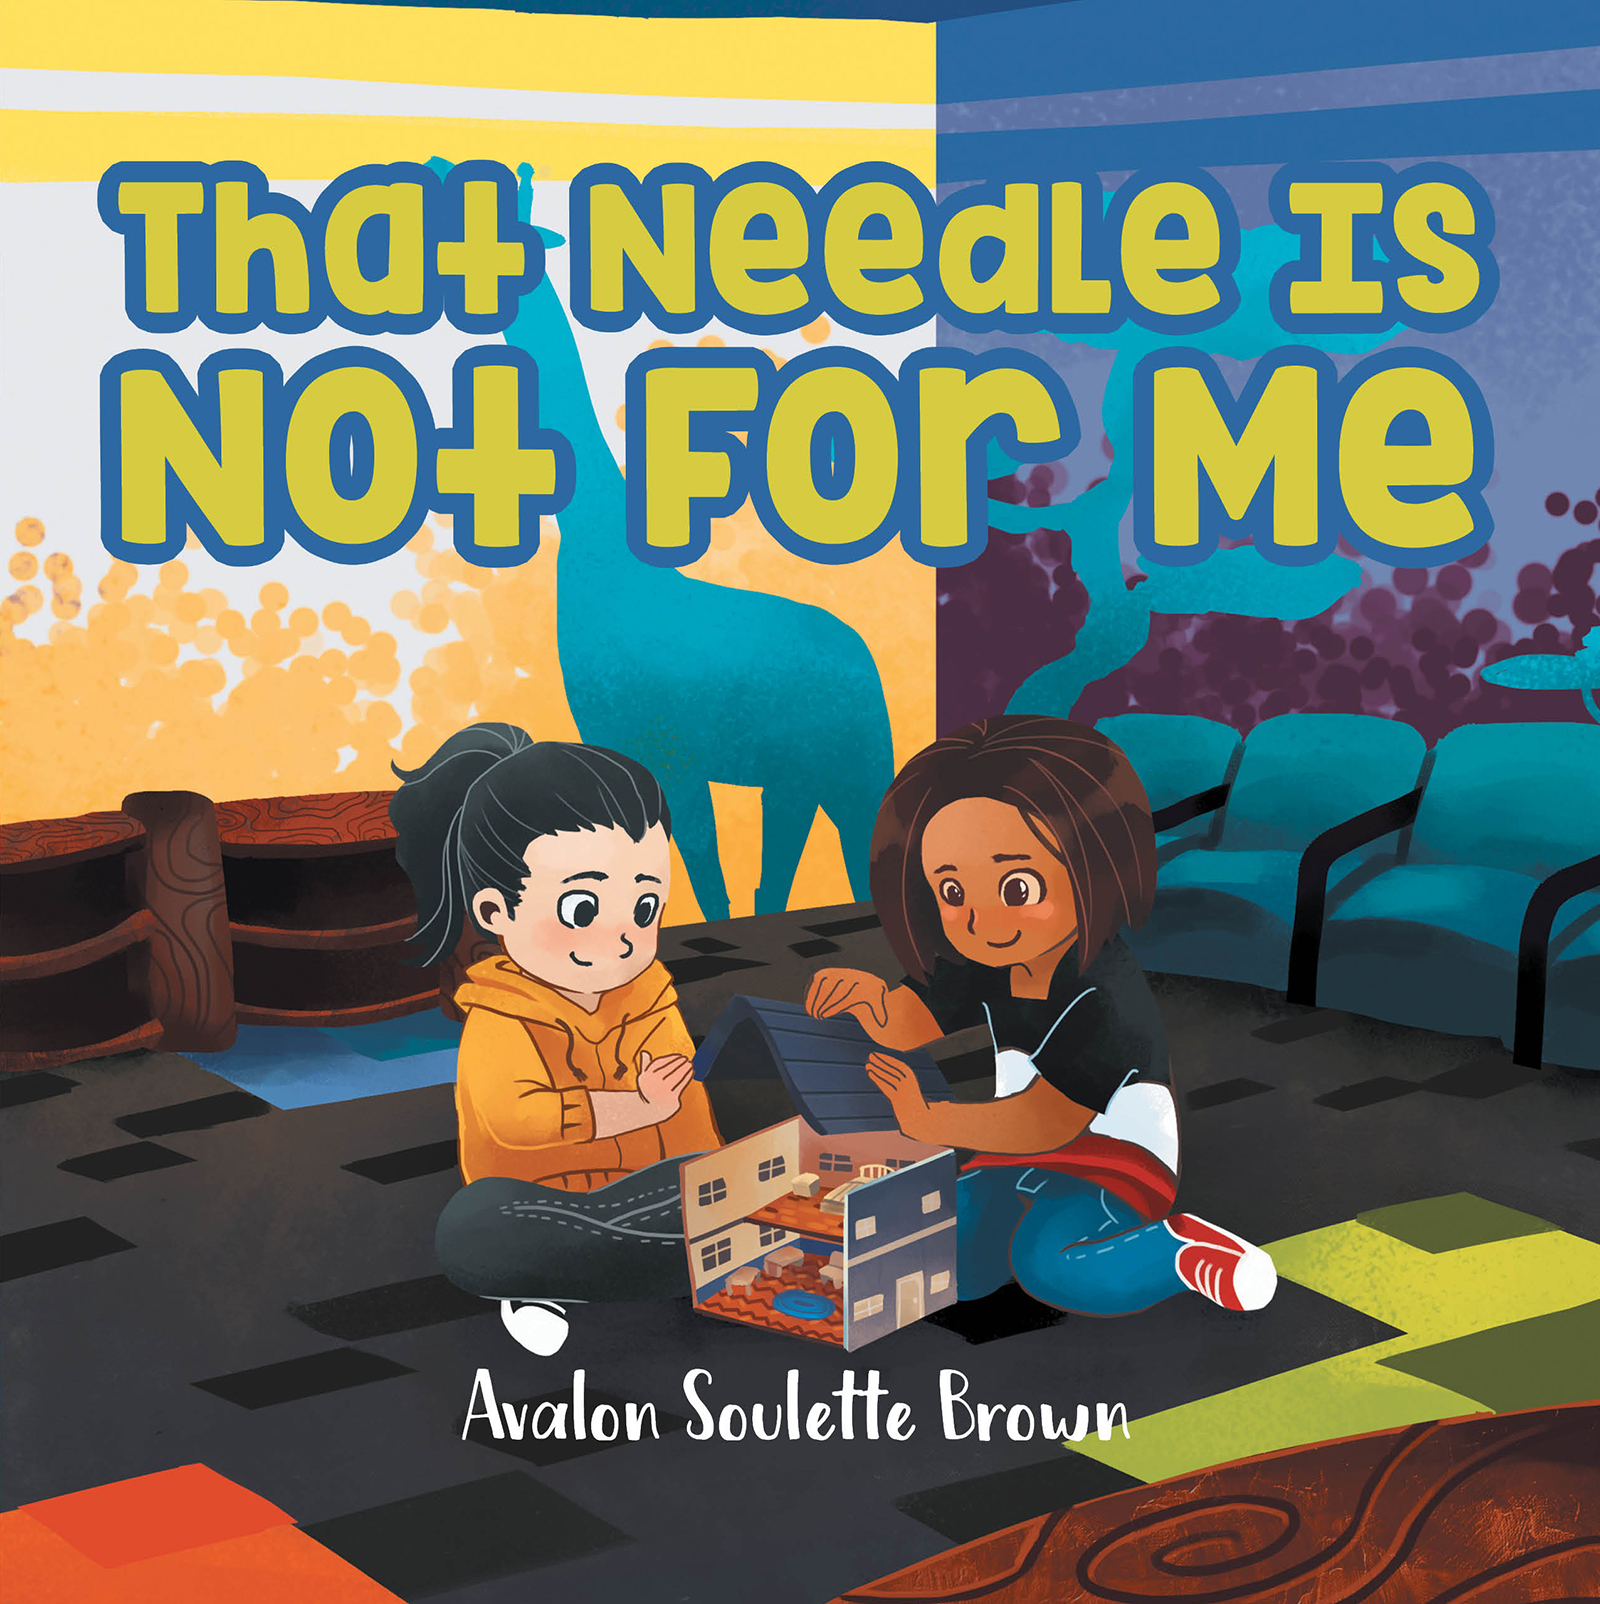 "That Needle is Not For Me" by Avalon Soulette Brown